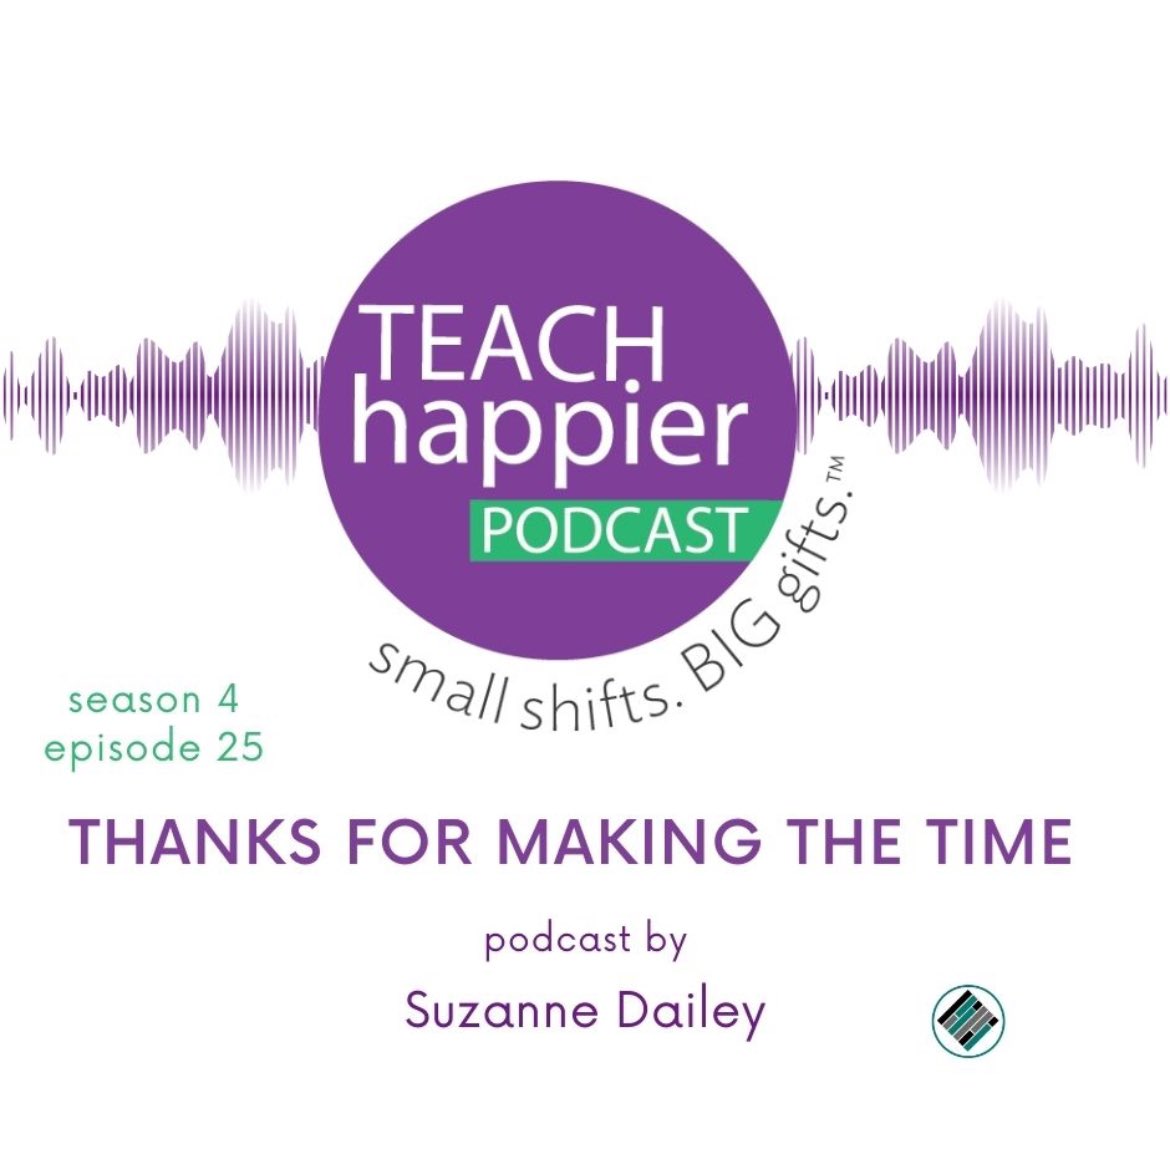 Last season, we were invited to BEGIN a conversation with “Tell me something good.” This week, we are invited to try a small shift in language when we END a conversation. Thanks for making the time to listen to this week’s episode💜 podcasts.apple.com/us/podcast/tea…